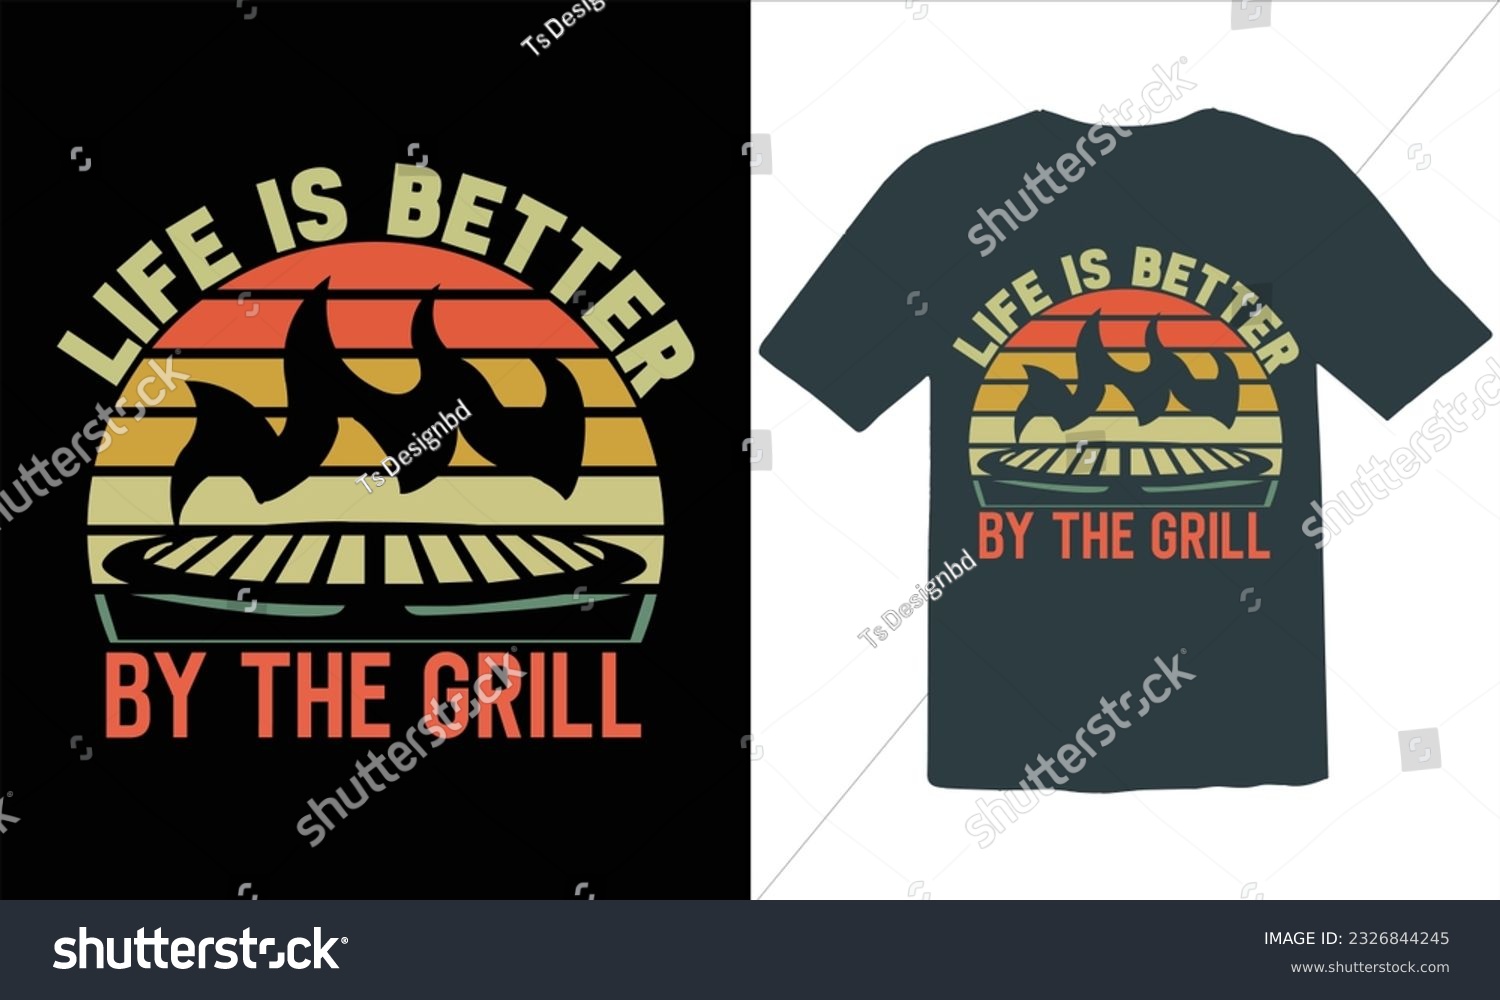 SVG of Life Is Better By The Grill T Shirt Design,BBQ T-shirt design,typography BBQ shirts design,BBQ Grilling shirts design vectors,Barbeque t-shirt,Typography vector T-shirt design,Funny BBQ Shirt, svg